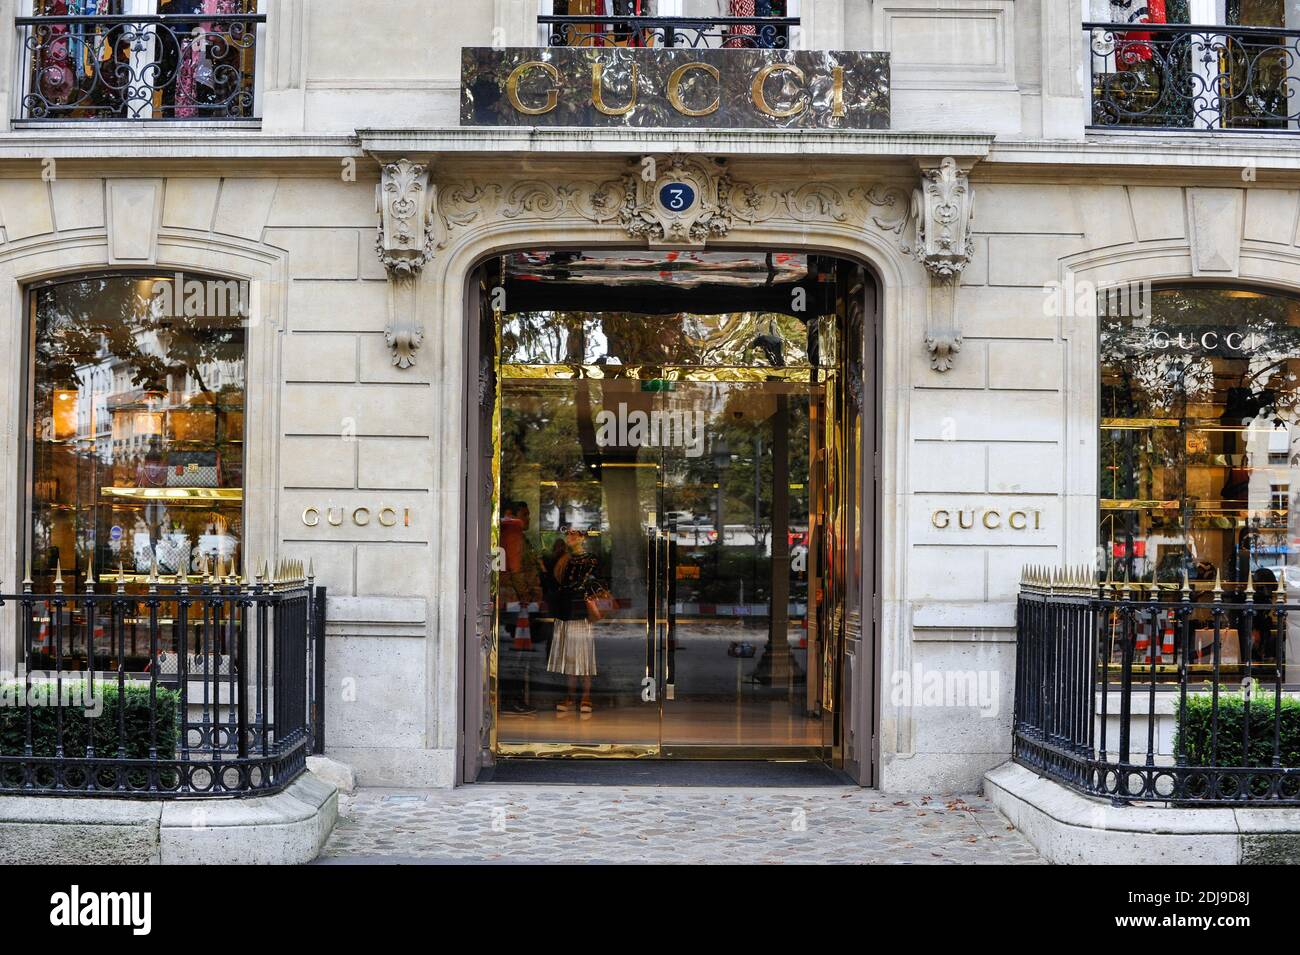 Begraafplaats inkt Eenvoud GUCCI a shop located on Avenue Montaigne in Paris, France on September 26,  2016. Photo by Bastien Guerche/ABACAPRESS.COM Stock Photo - Alamy